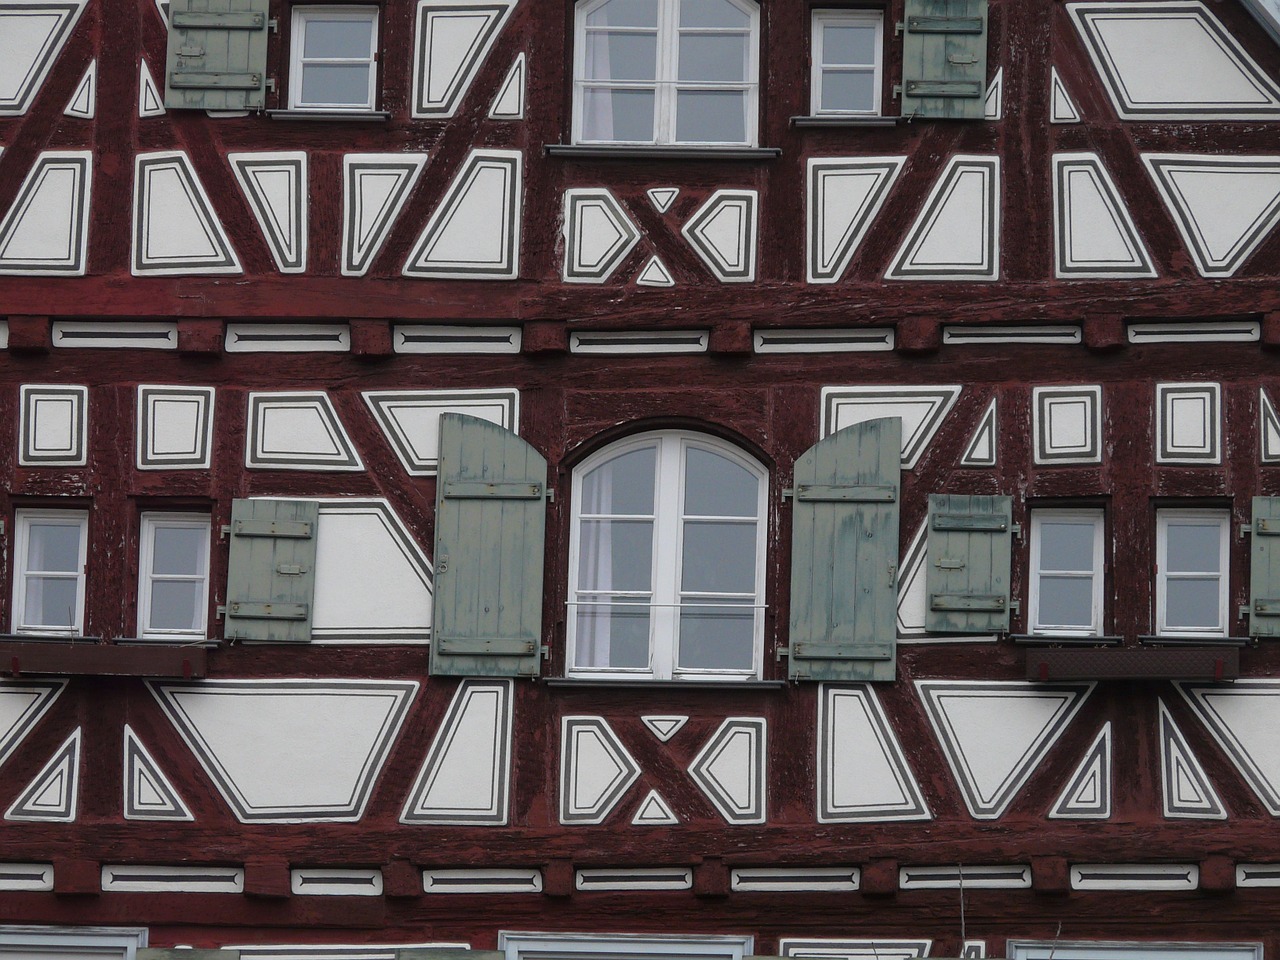 truss,fachwerkhaus,facade,building,window,shutter,shutters,free pictures, free photos, free images, royalty free, free illustrations, public domain